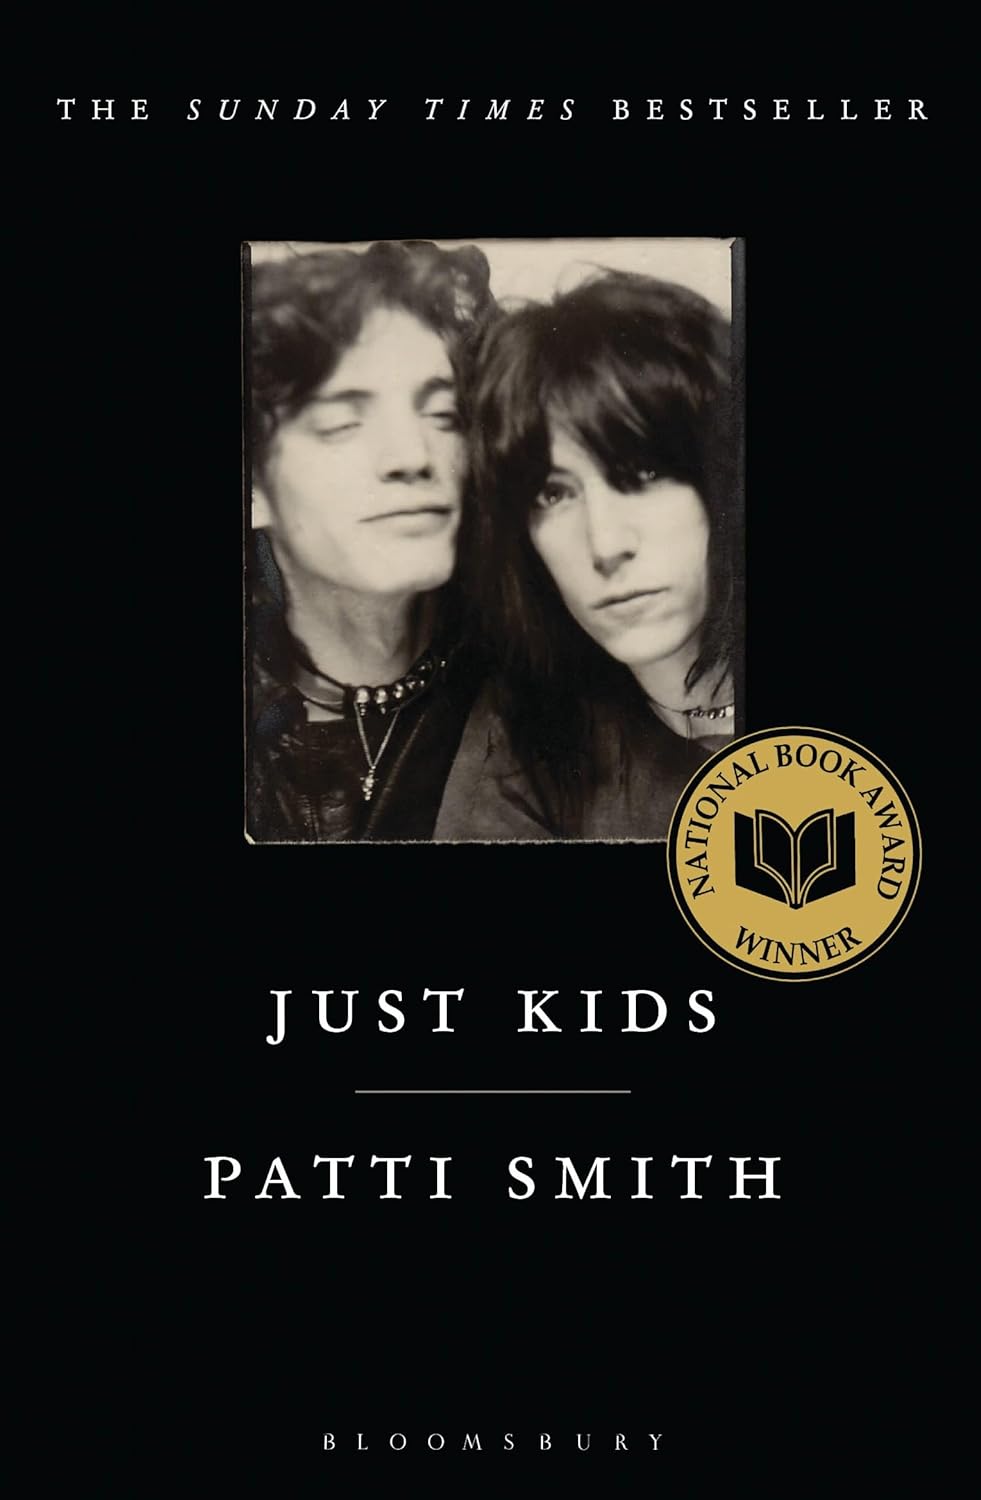 The front cover of Just Kids. A black background, with a square shaped black and white image in the centre of two young adults. There is a gold circle on the cover saying 'National Book Award winner'. White writing at the top of the cover says The Sunday Times Bestseller.